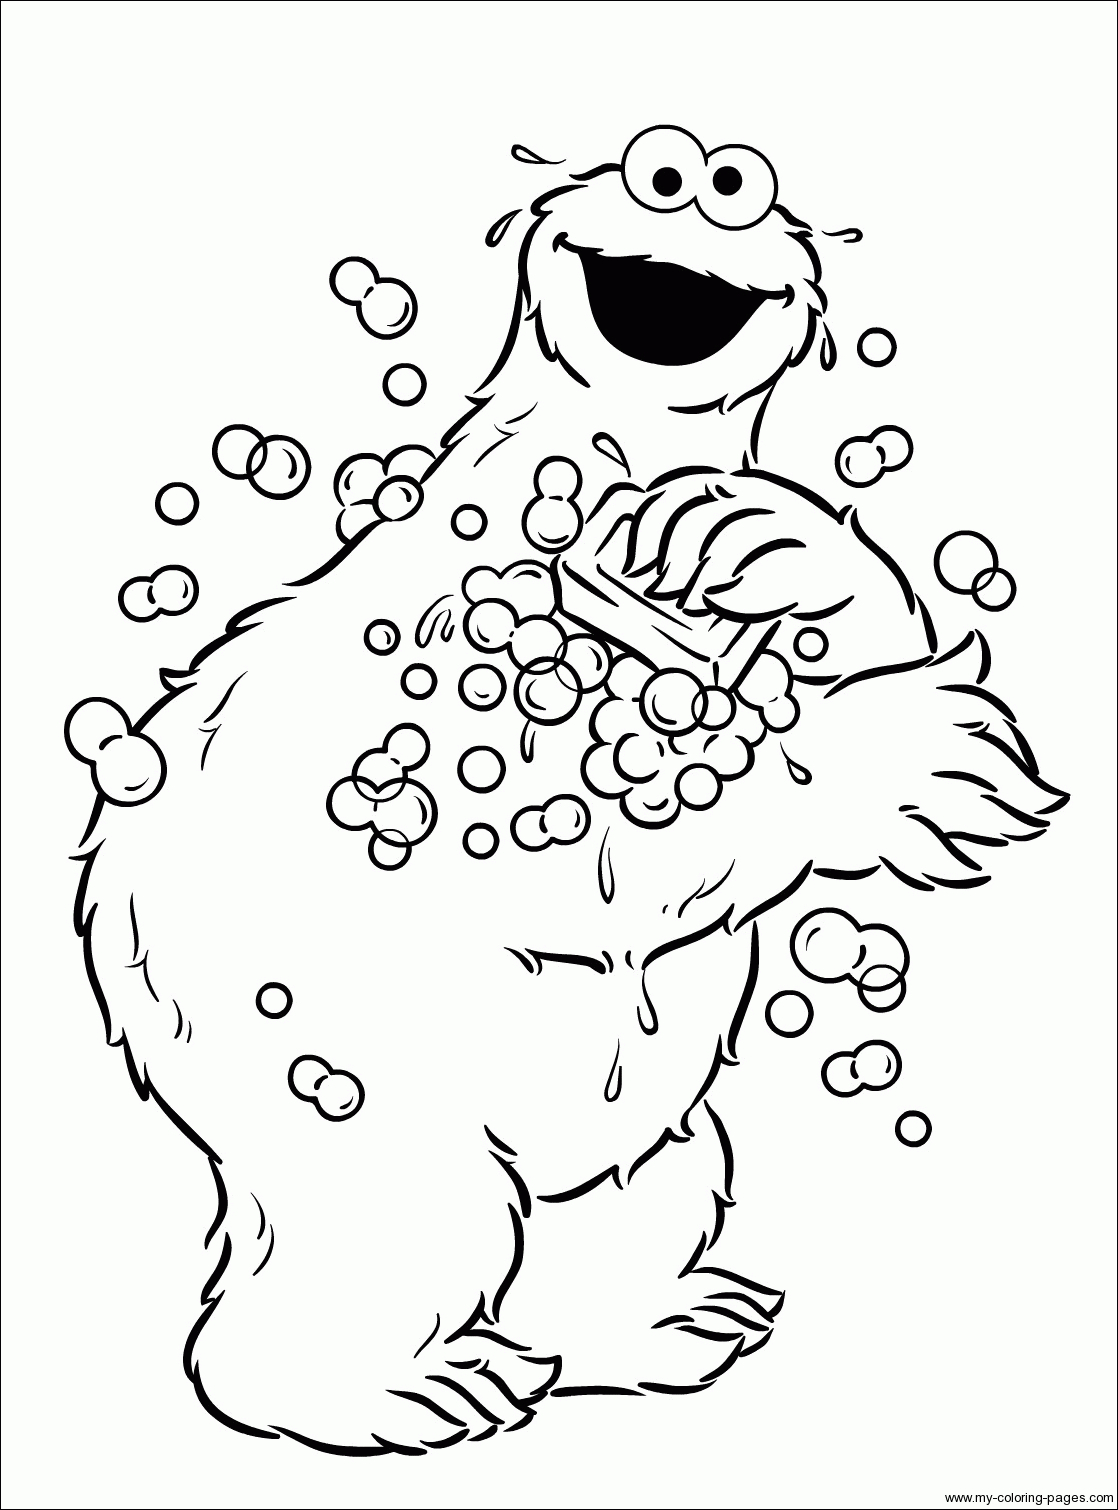 Monster Coloring Pages To Print Printable Coloring Pages Of The Cookie Monster Coloring Home